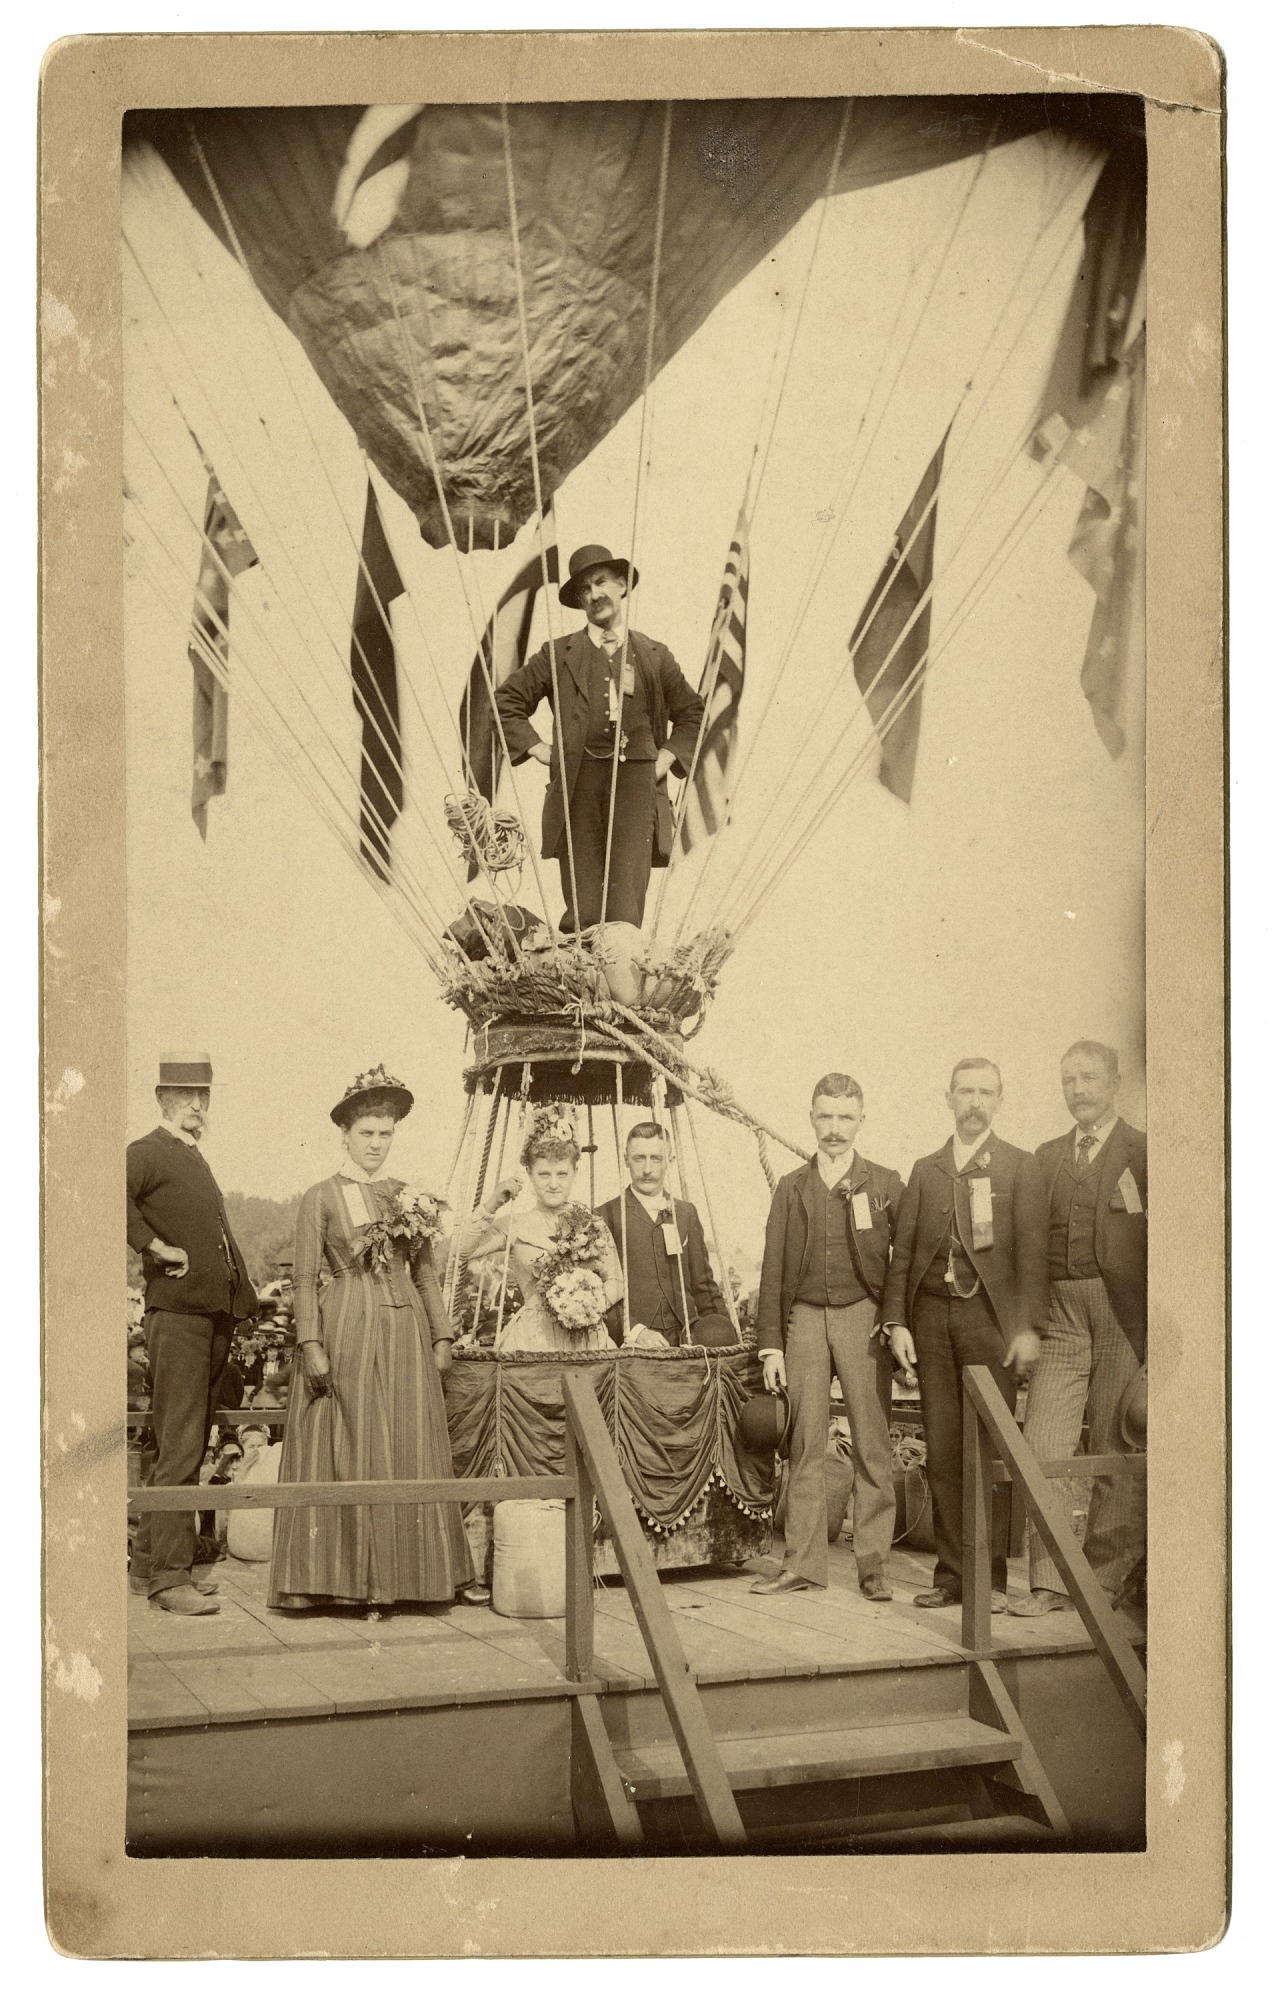 A group stands at a large balloon. A couple is in the basket, with another man standing above them.